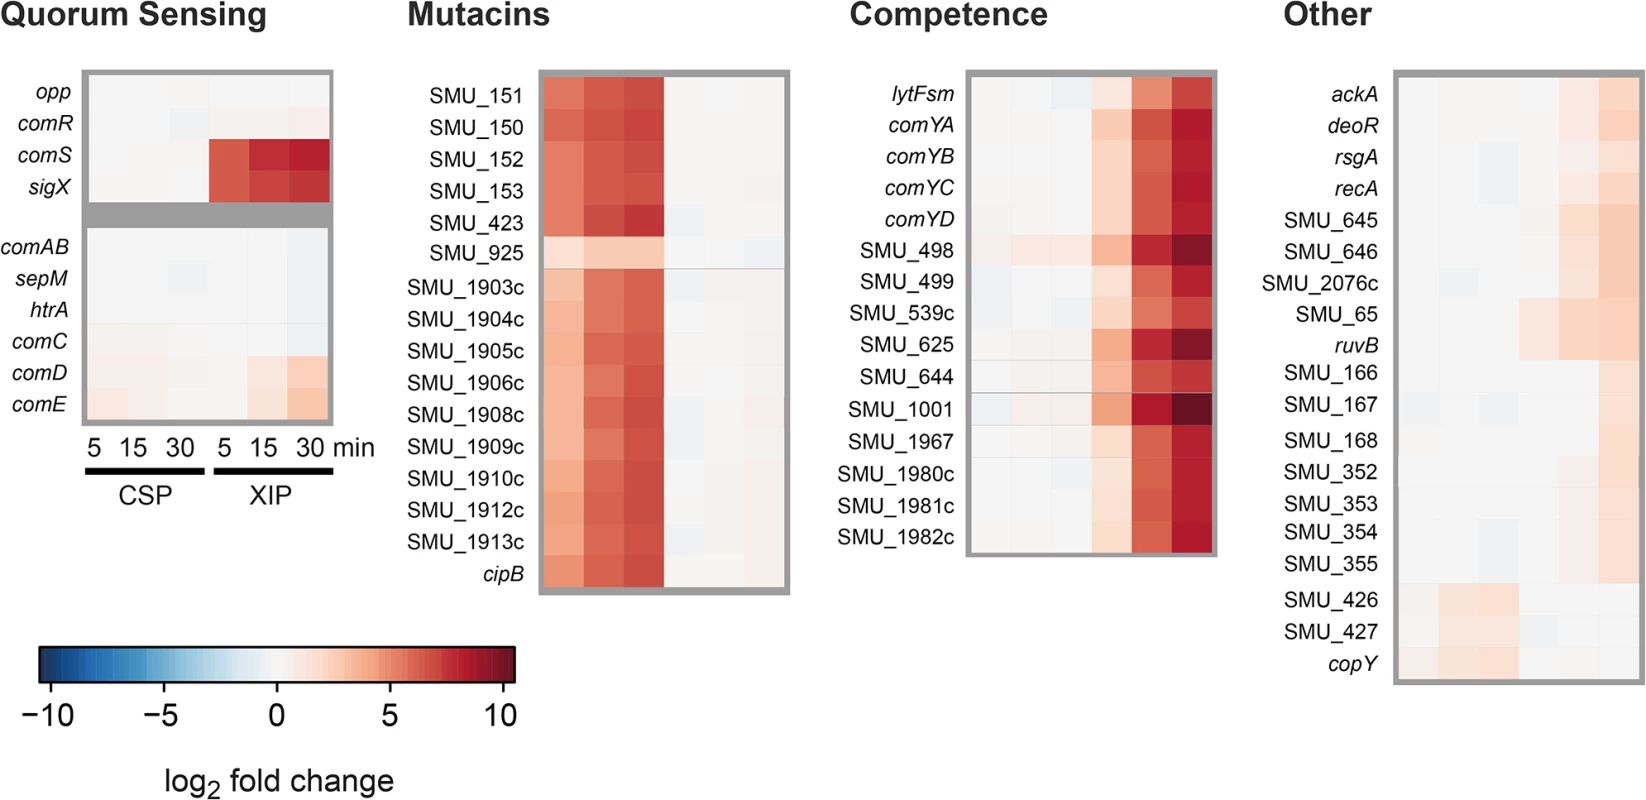 Time resolved transcriptome analysis of XIP and CSP induced <i>S. mutans</i> WT cultures in CDM.